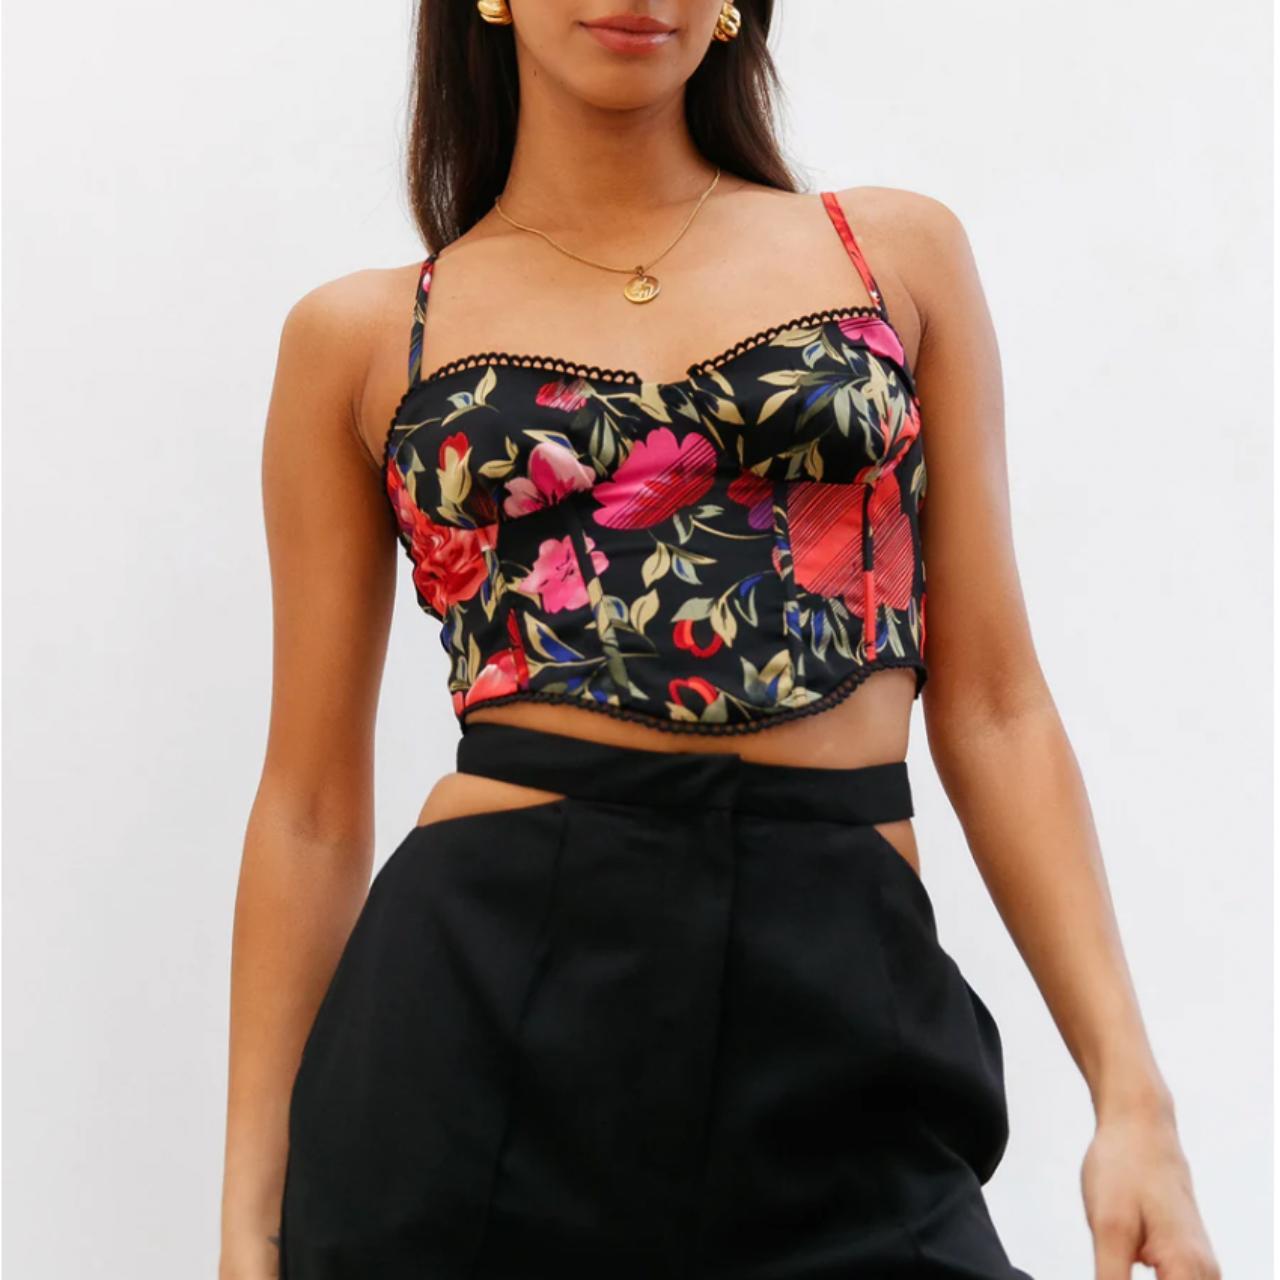 Floral Crop Tops for Women  Cute Crop Tops - Hello Molly AU